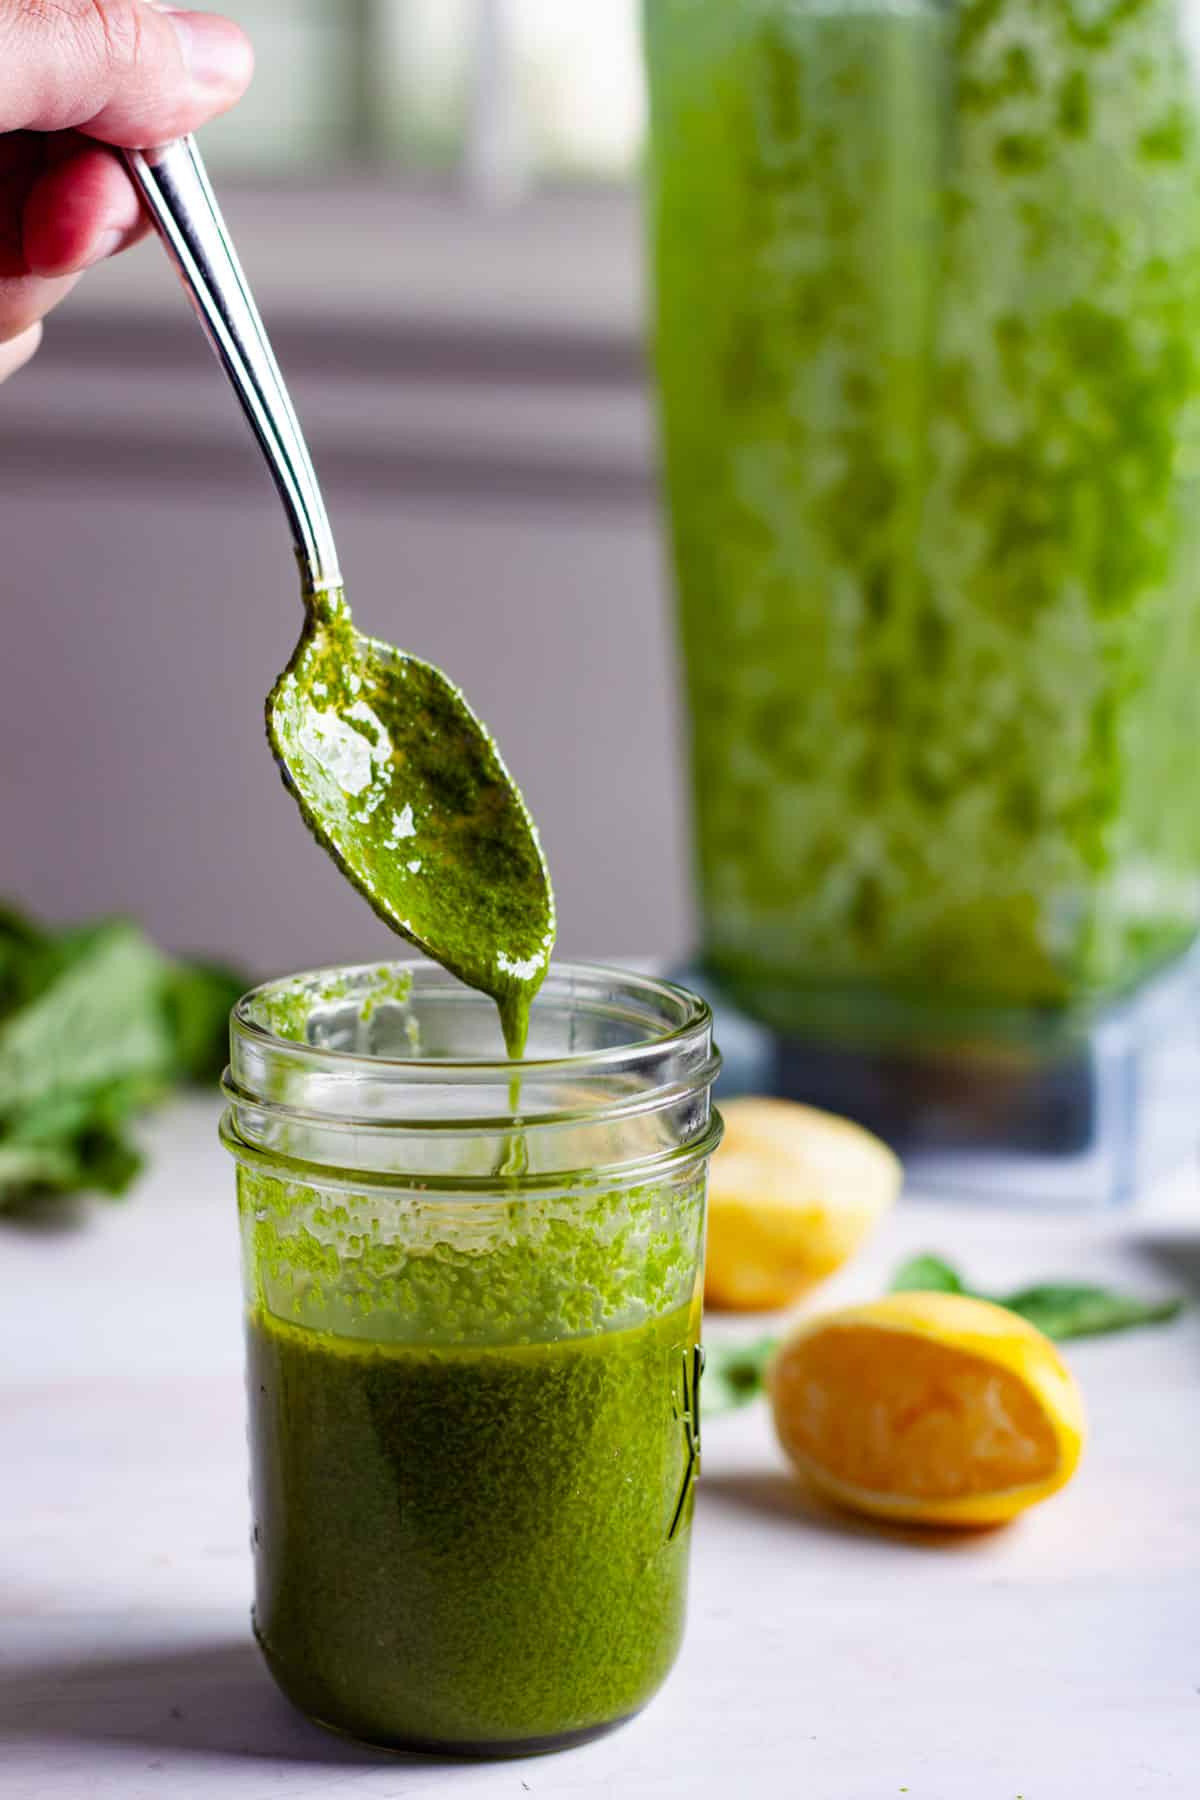 Basil vinaigrette in a glass jar with a spoon dripping some of it into the jar.